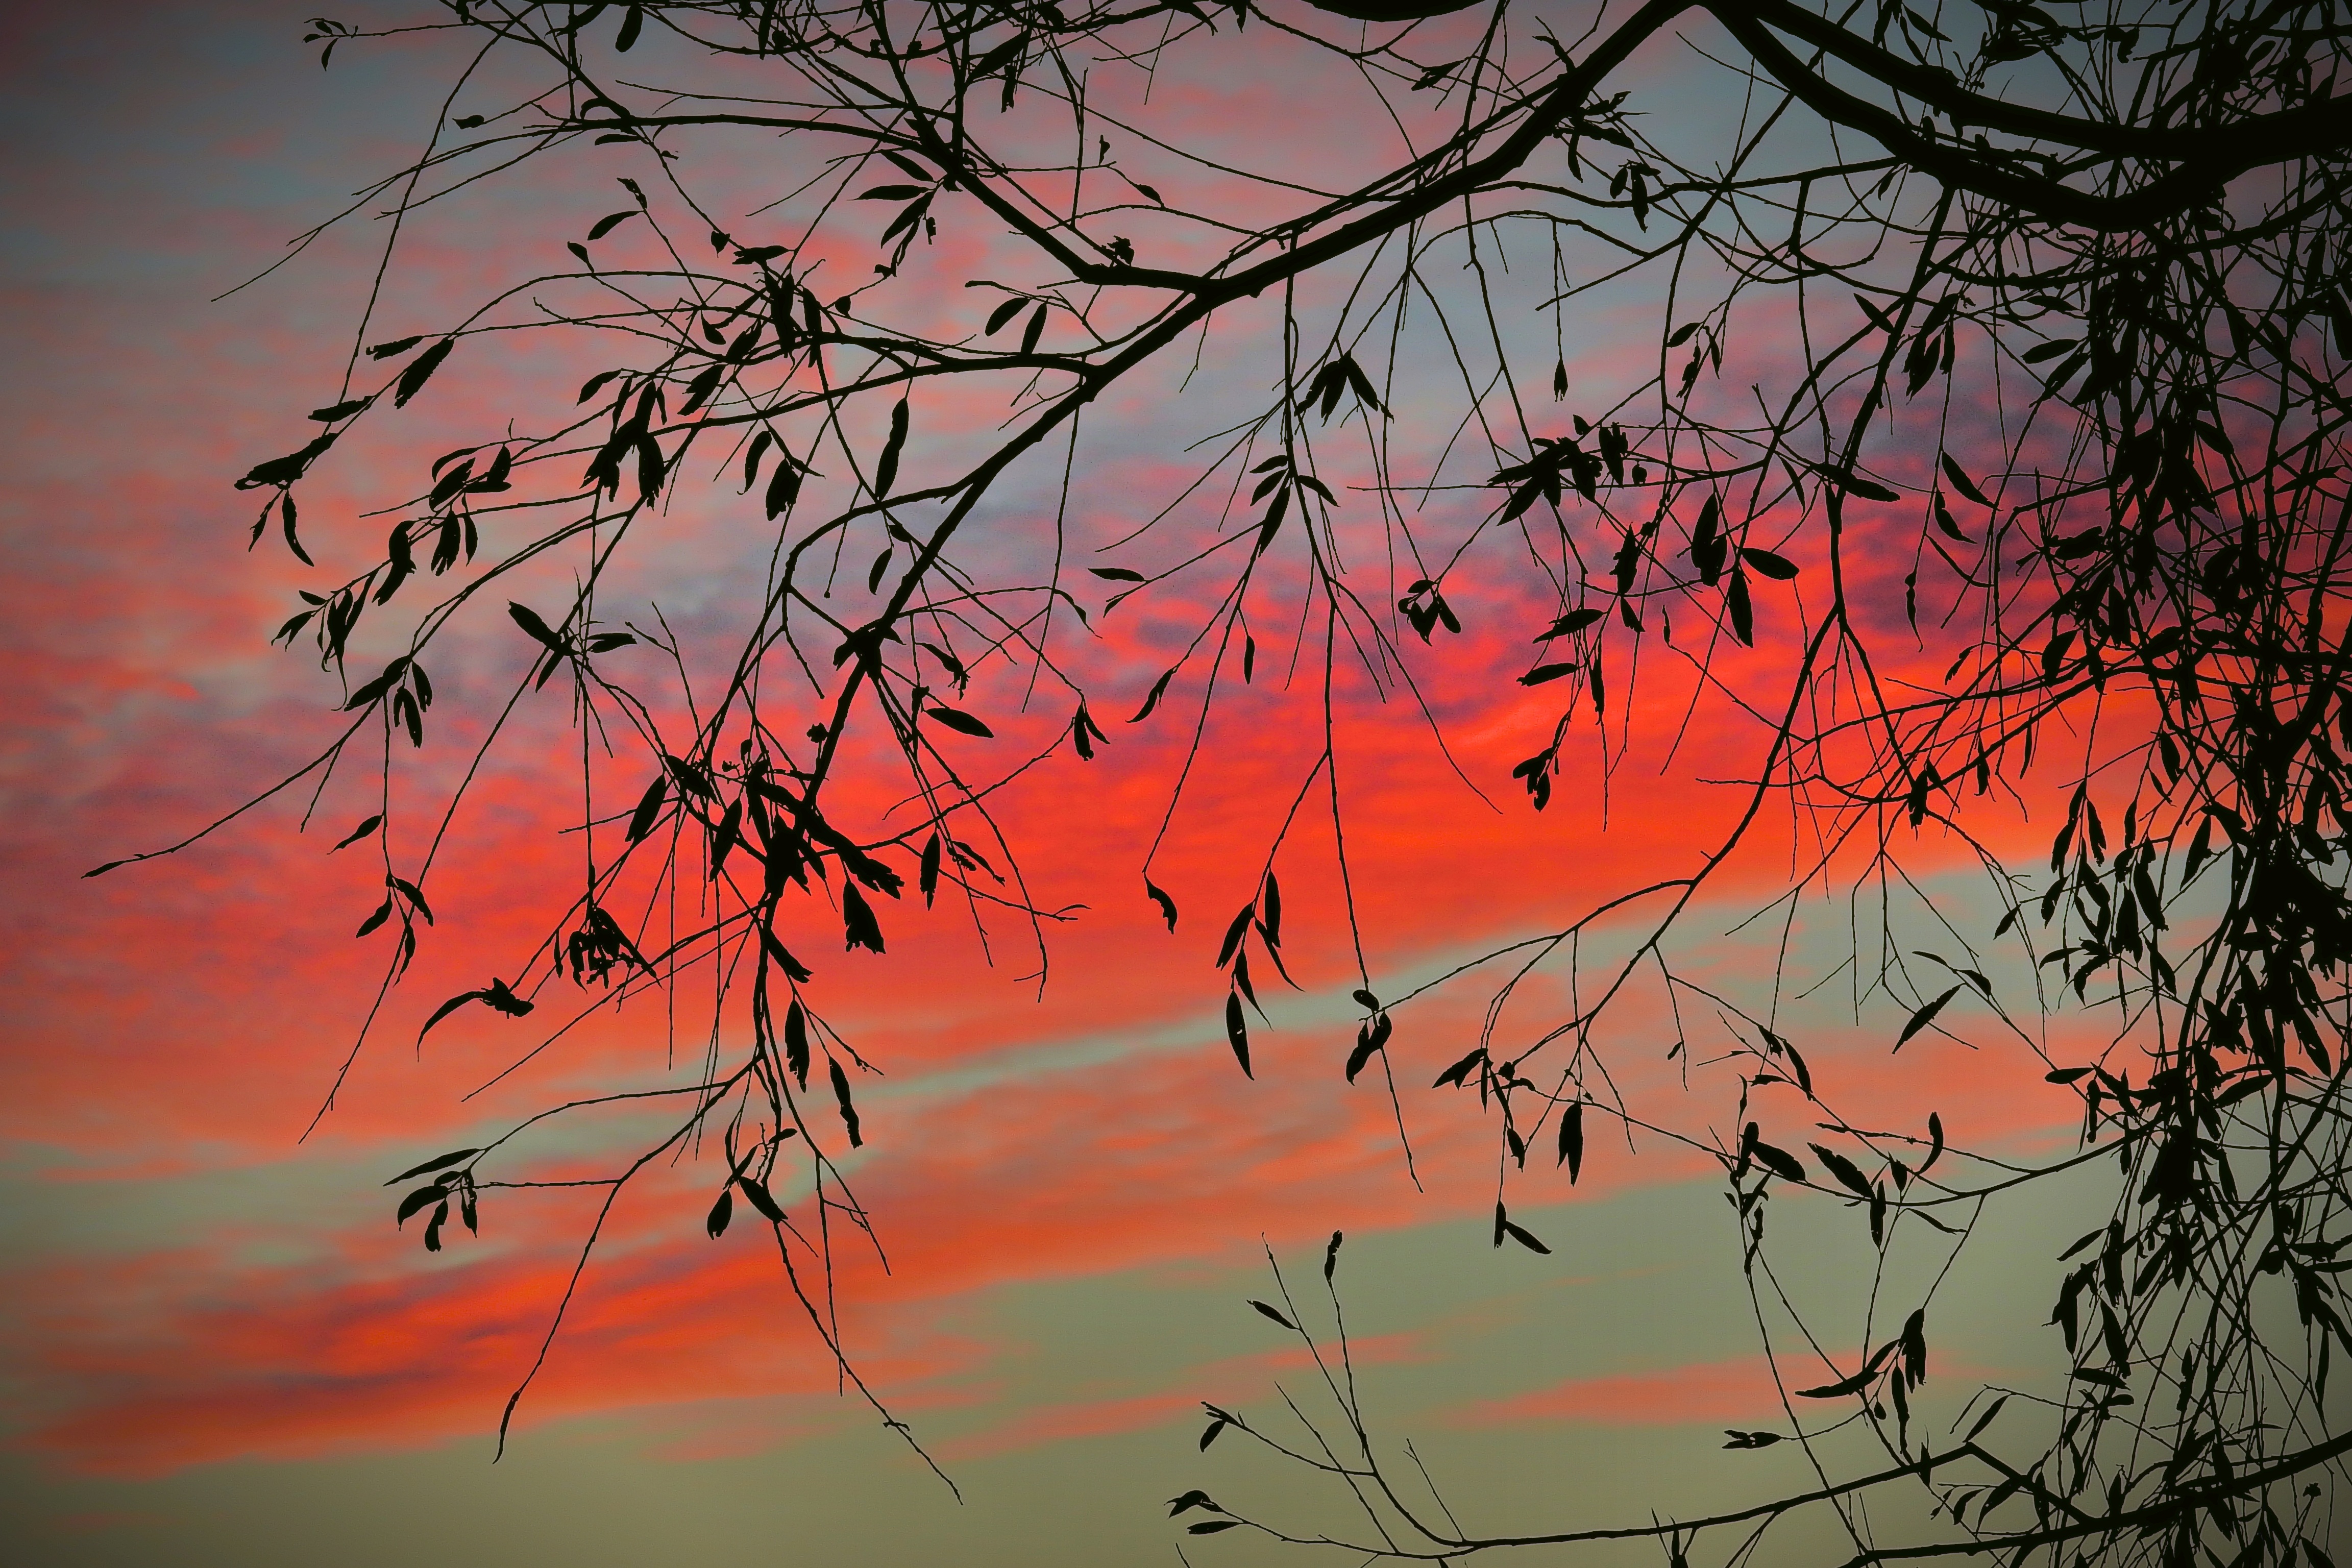 twilight, leaves, tree, nature, sunset, sky, clouds, wood, branch, dusk 1080p